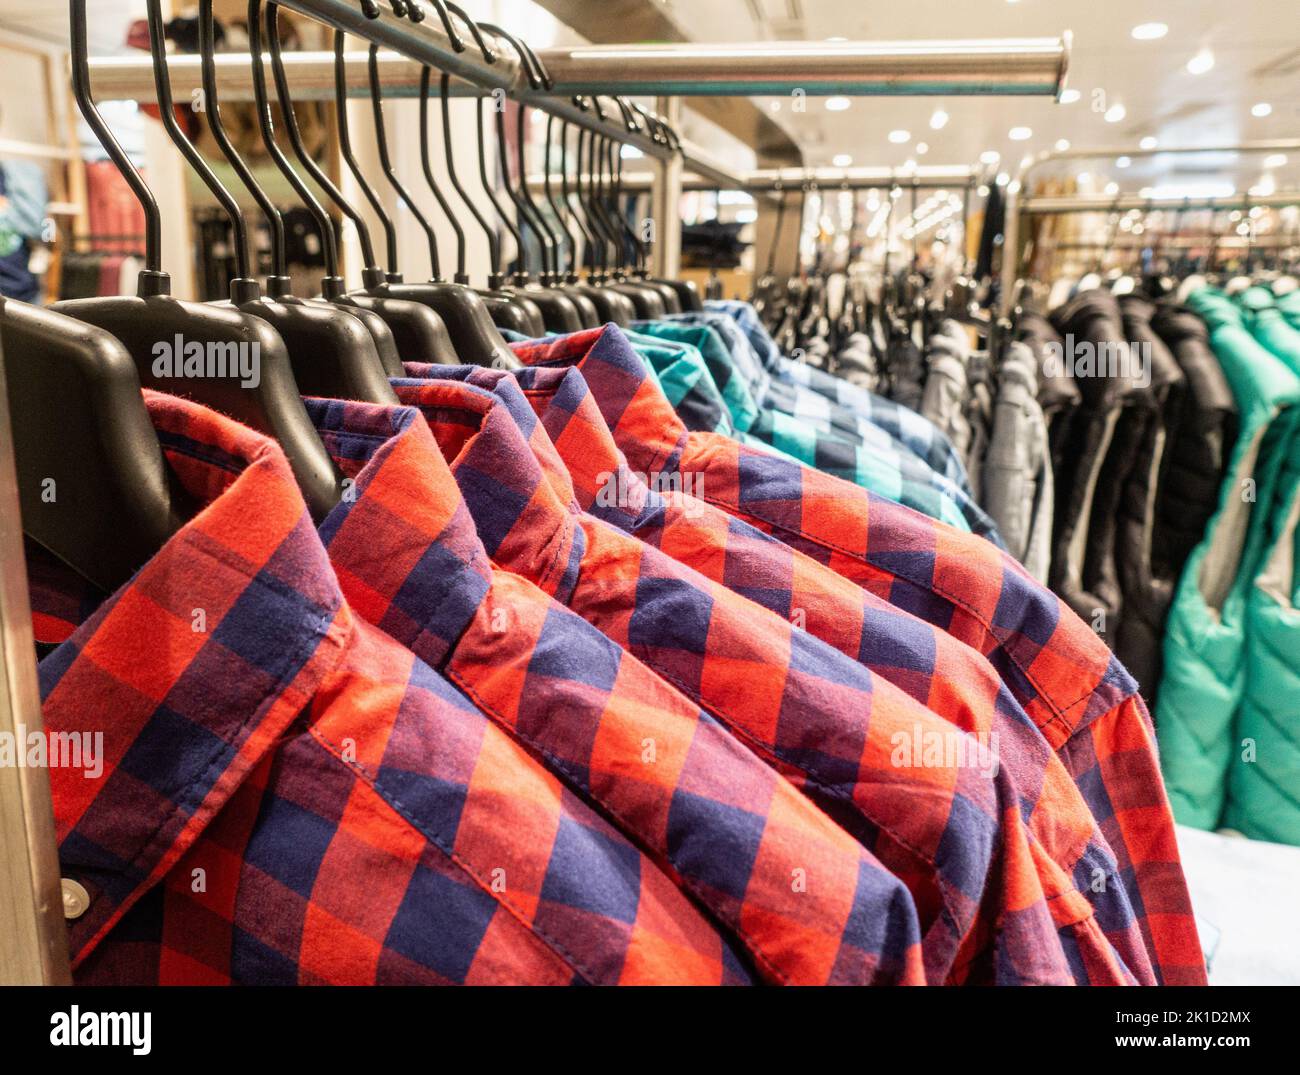 Shirts on hangers in clothing store. Stock Photo